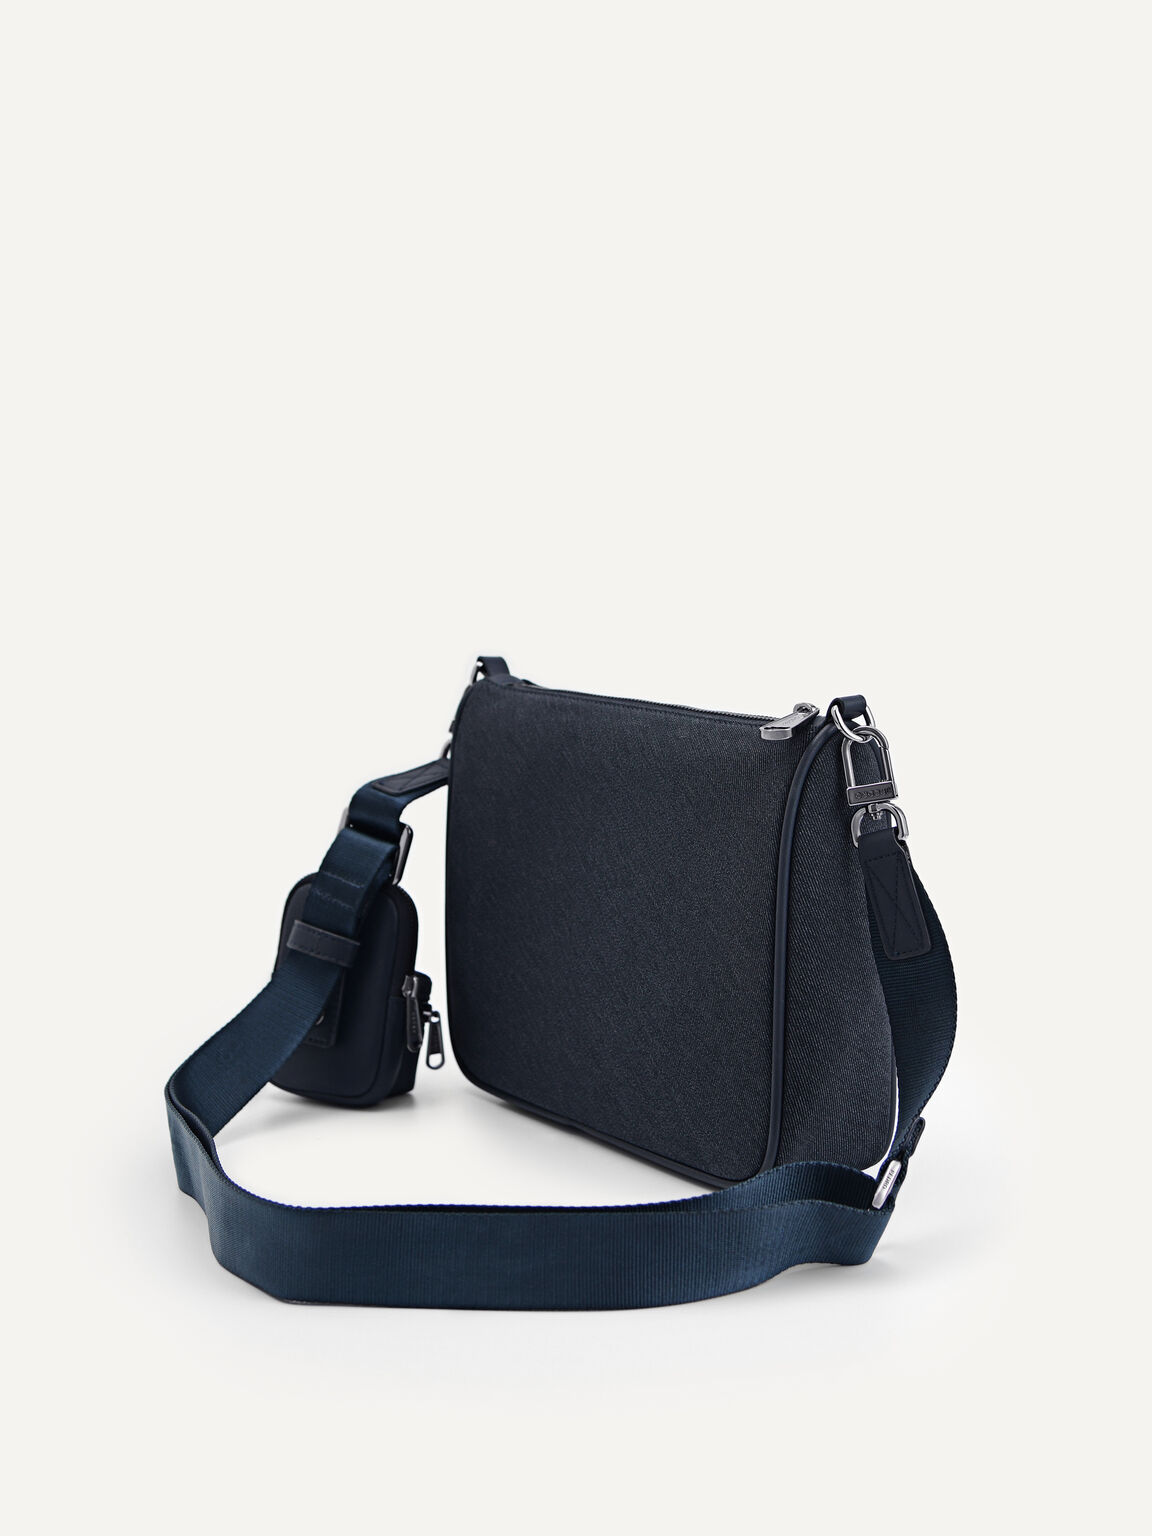 Denim Sling Bag with Pouch, Navy, hi-res